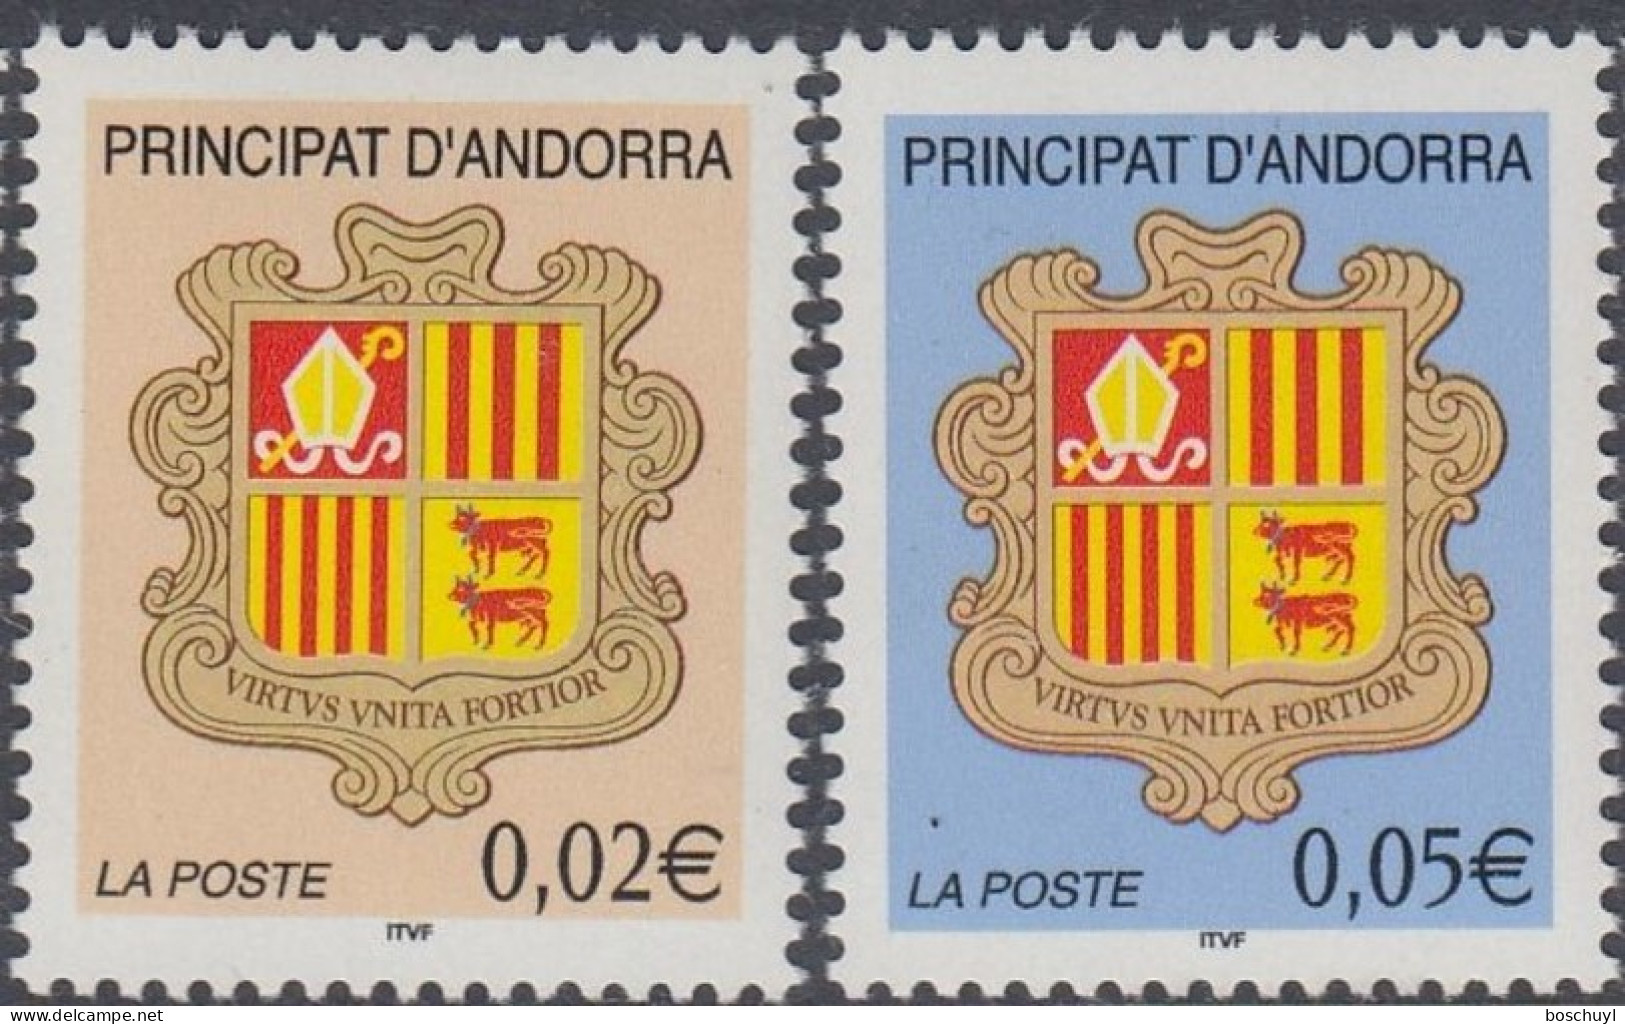 Andorra, French, 2002, Heraldry, Definitives, MNH, Michel 577-578 - Unused Stamps